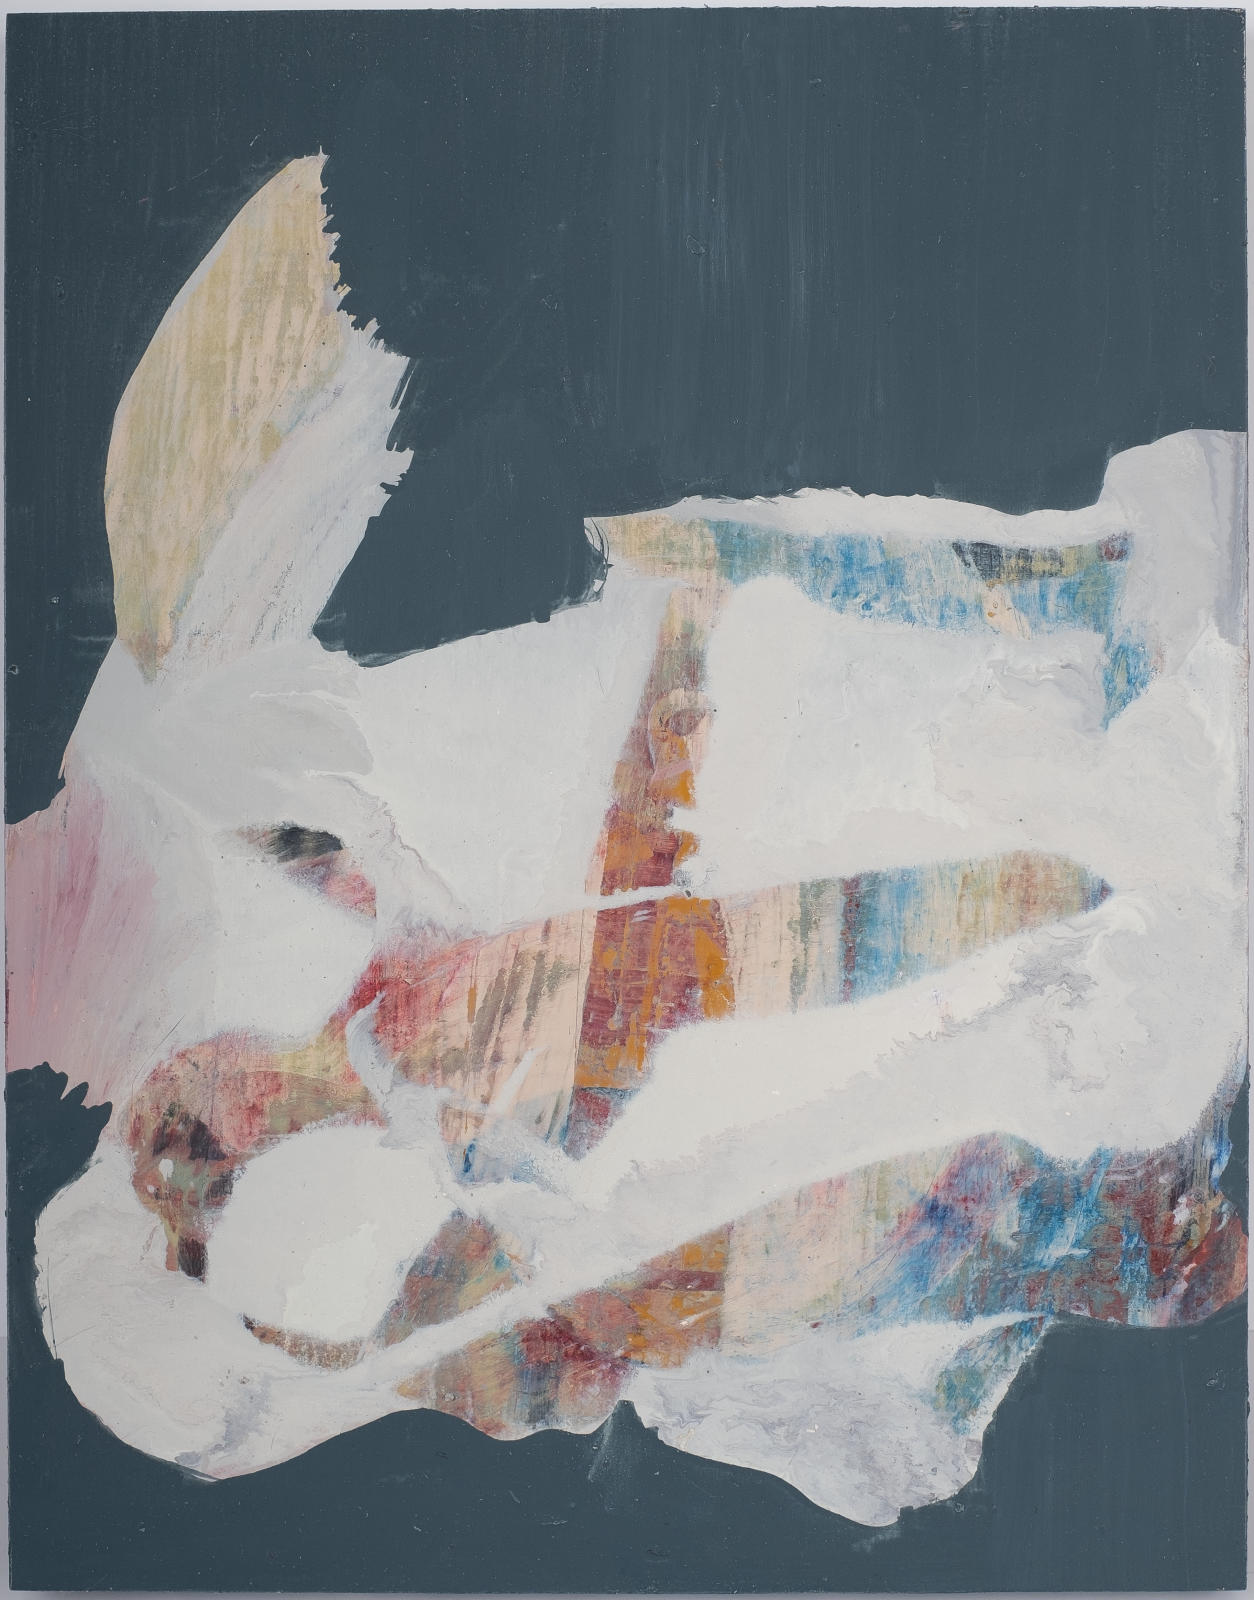 Mary McDonnell, Blue Tail Fly, 2018